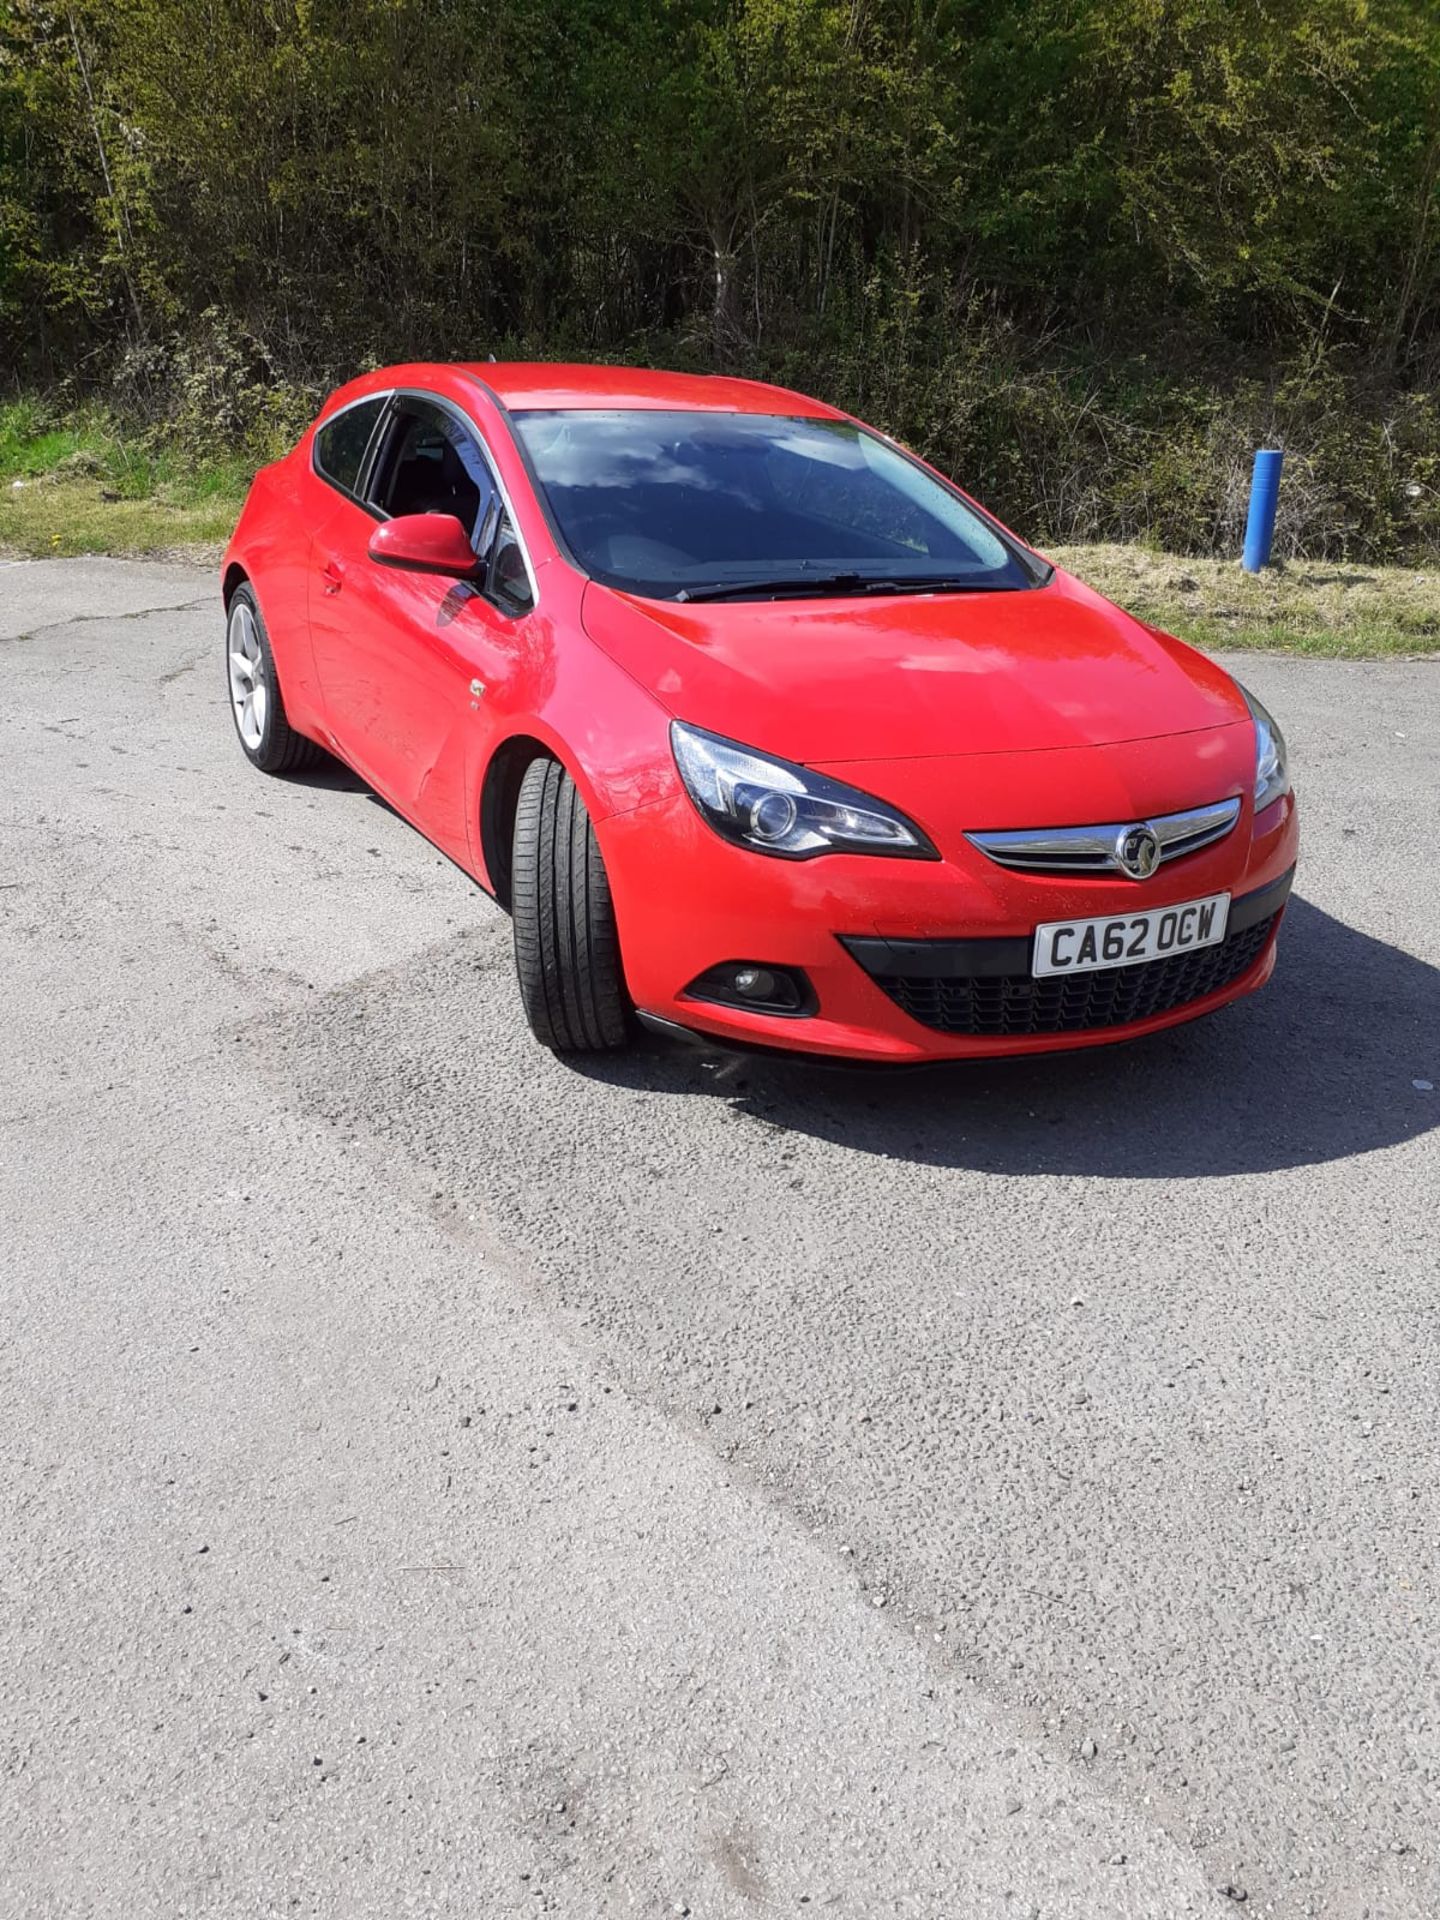 2013 VAUXHALL ASTRA GTC SRI CDTI S/S, 3 DOOR HATCHBACK, SHOWING 3 PREVIOUS KEEPERS, DIESEL ENGINE - Image 5 of 16